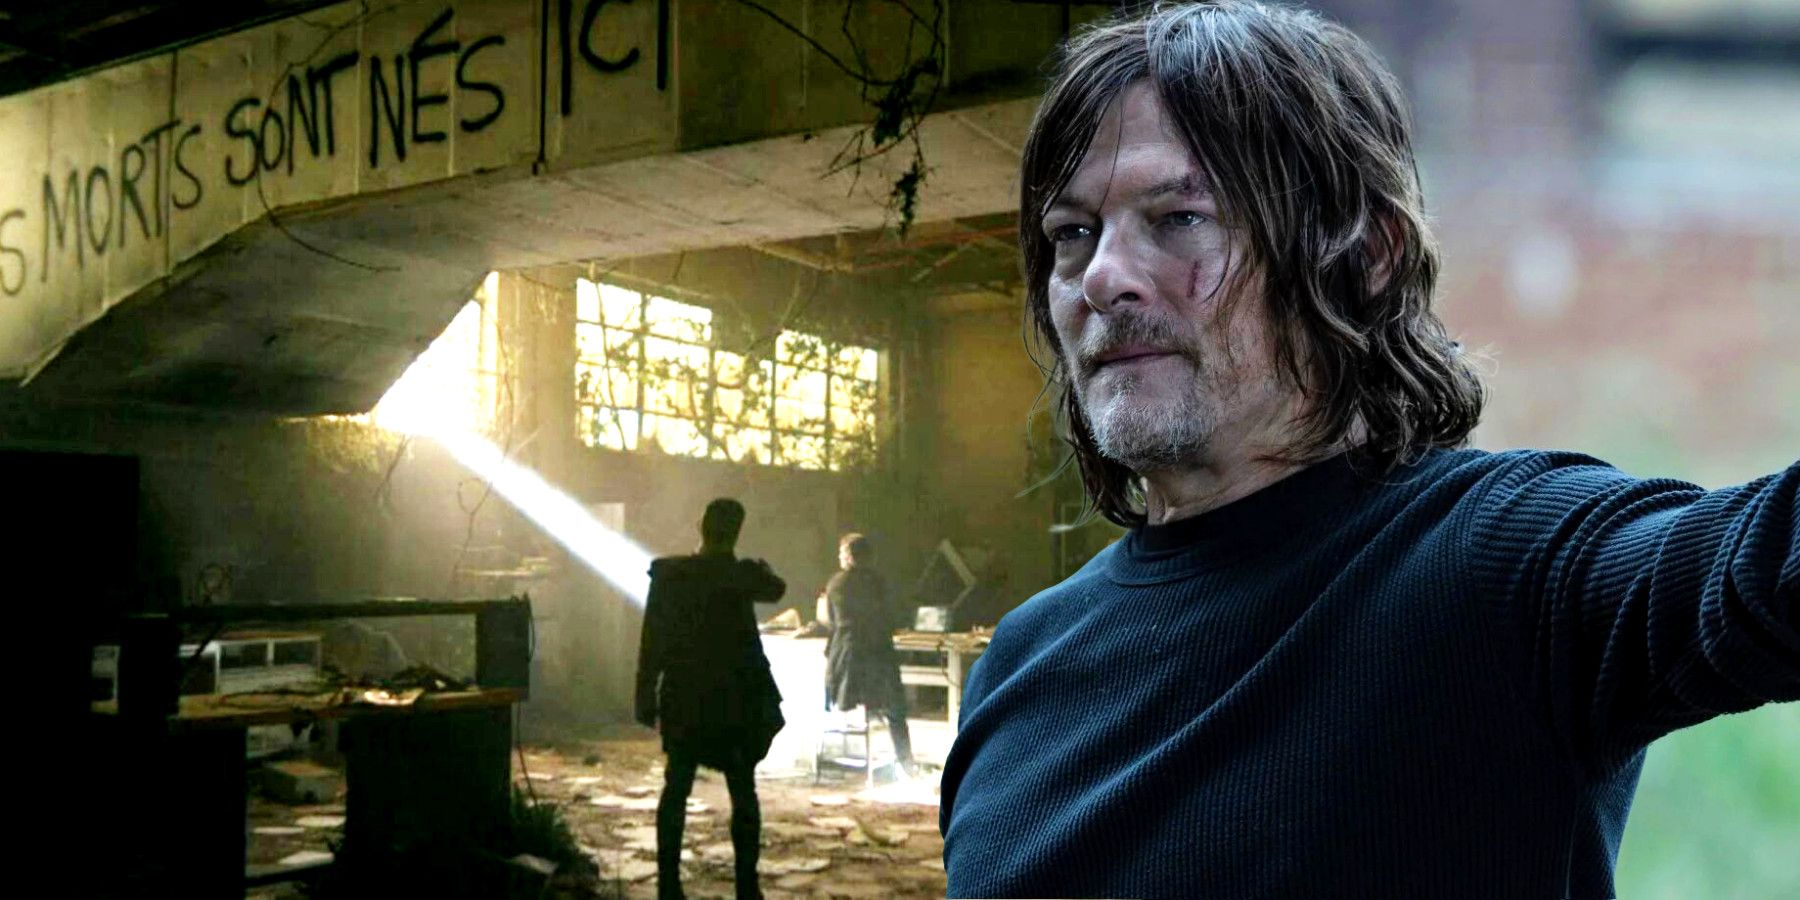 Daryl going to Europe in Walking Dead spinoff show